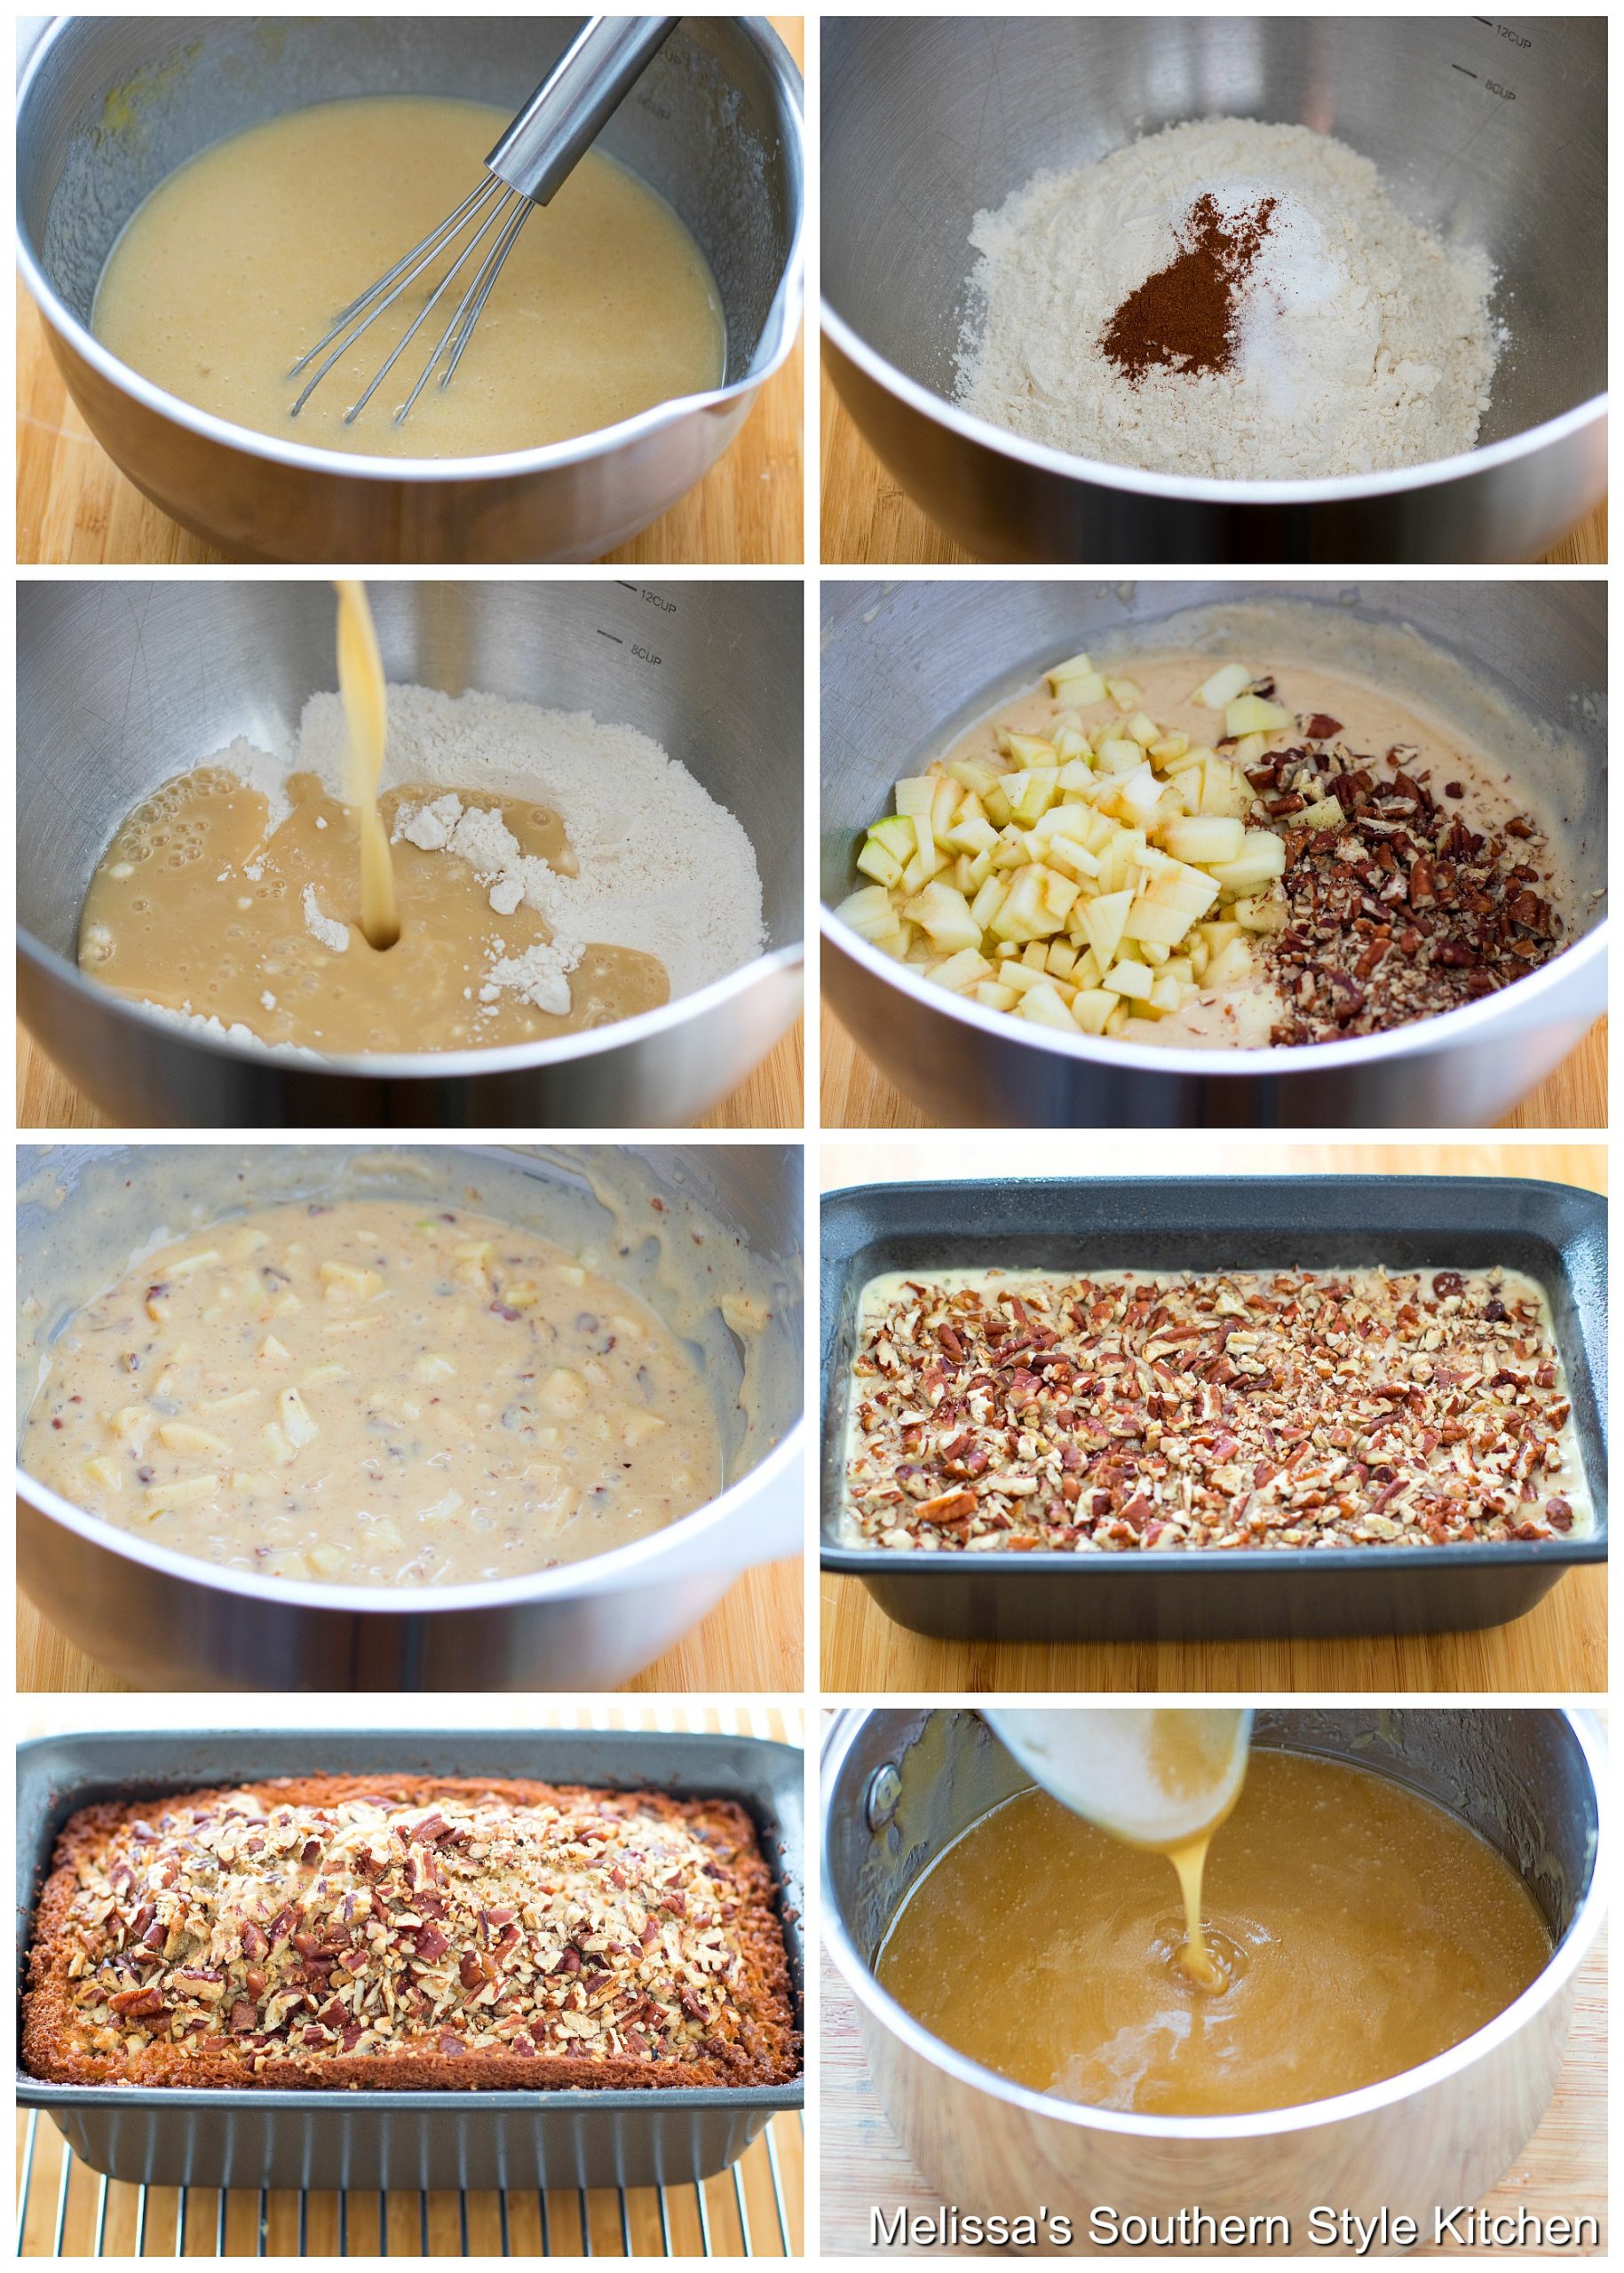 Step-by-step preparation images and ingredients for apple bread